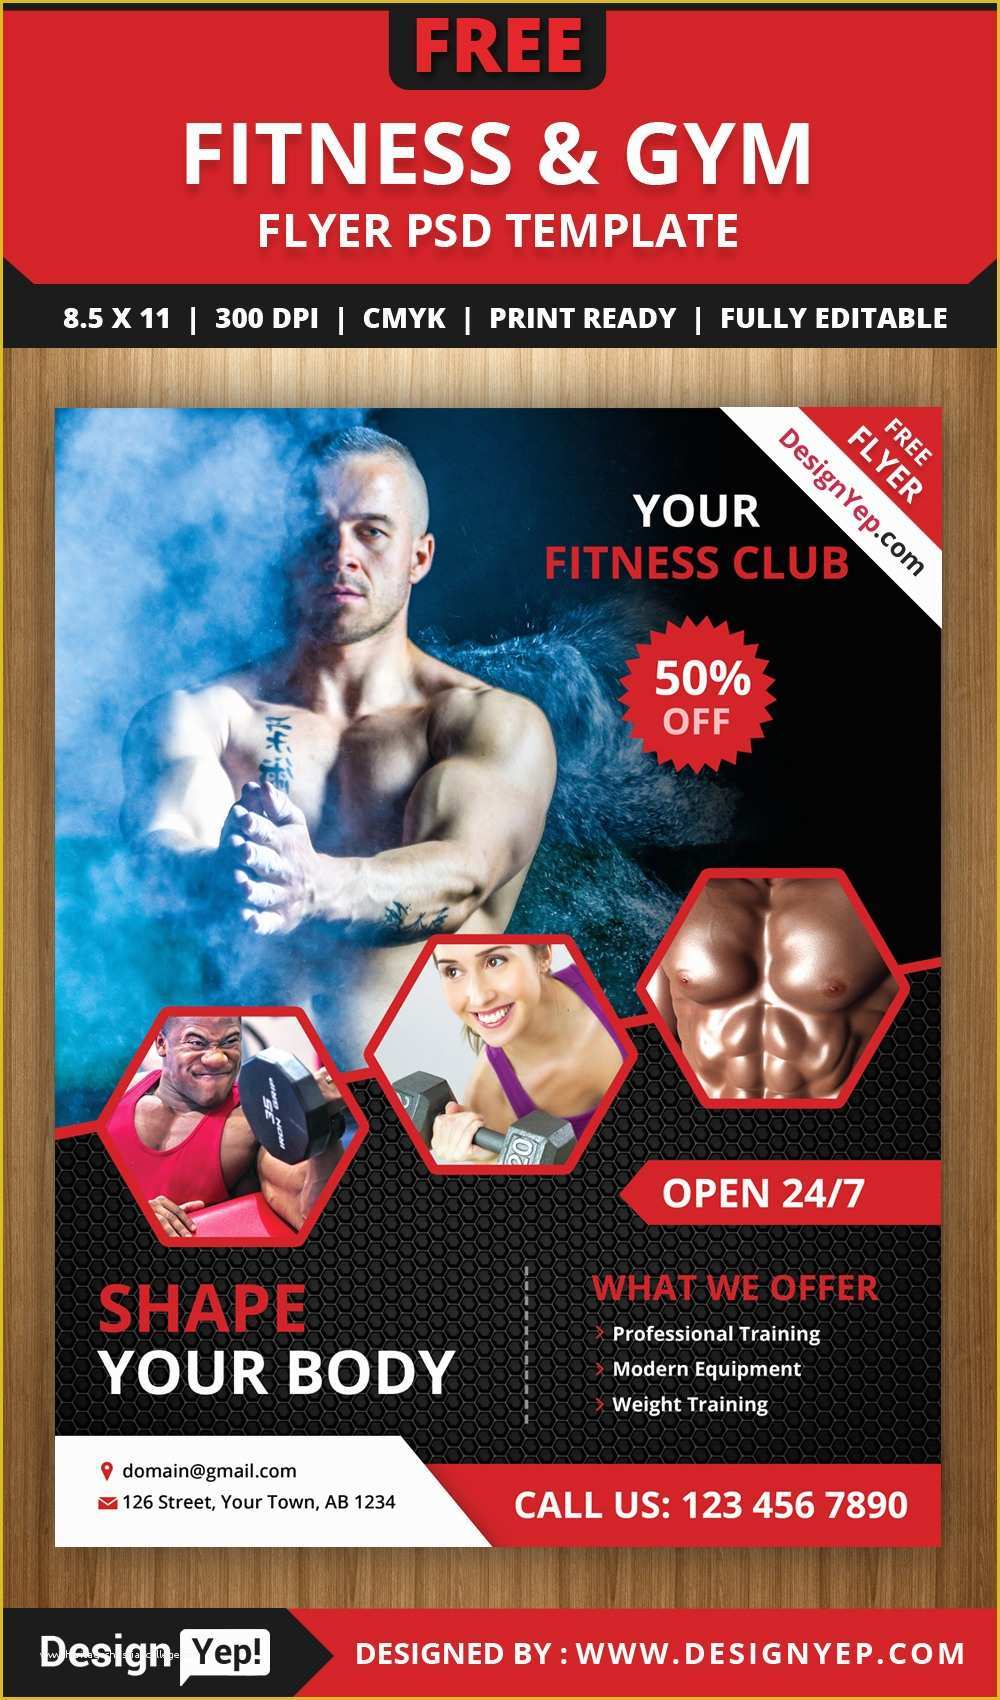 Fitness Poster Template Free Of Free Fitness And Gym Flyer Psd Template 